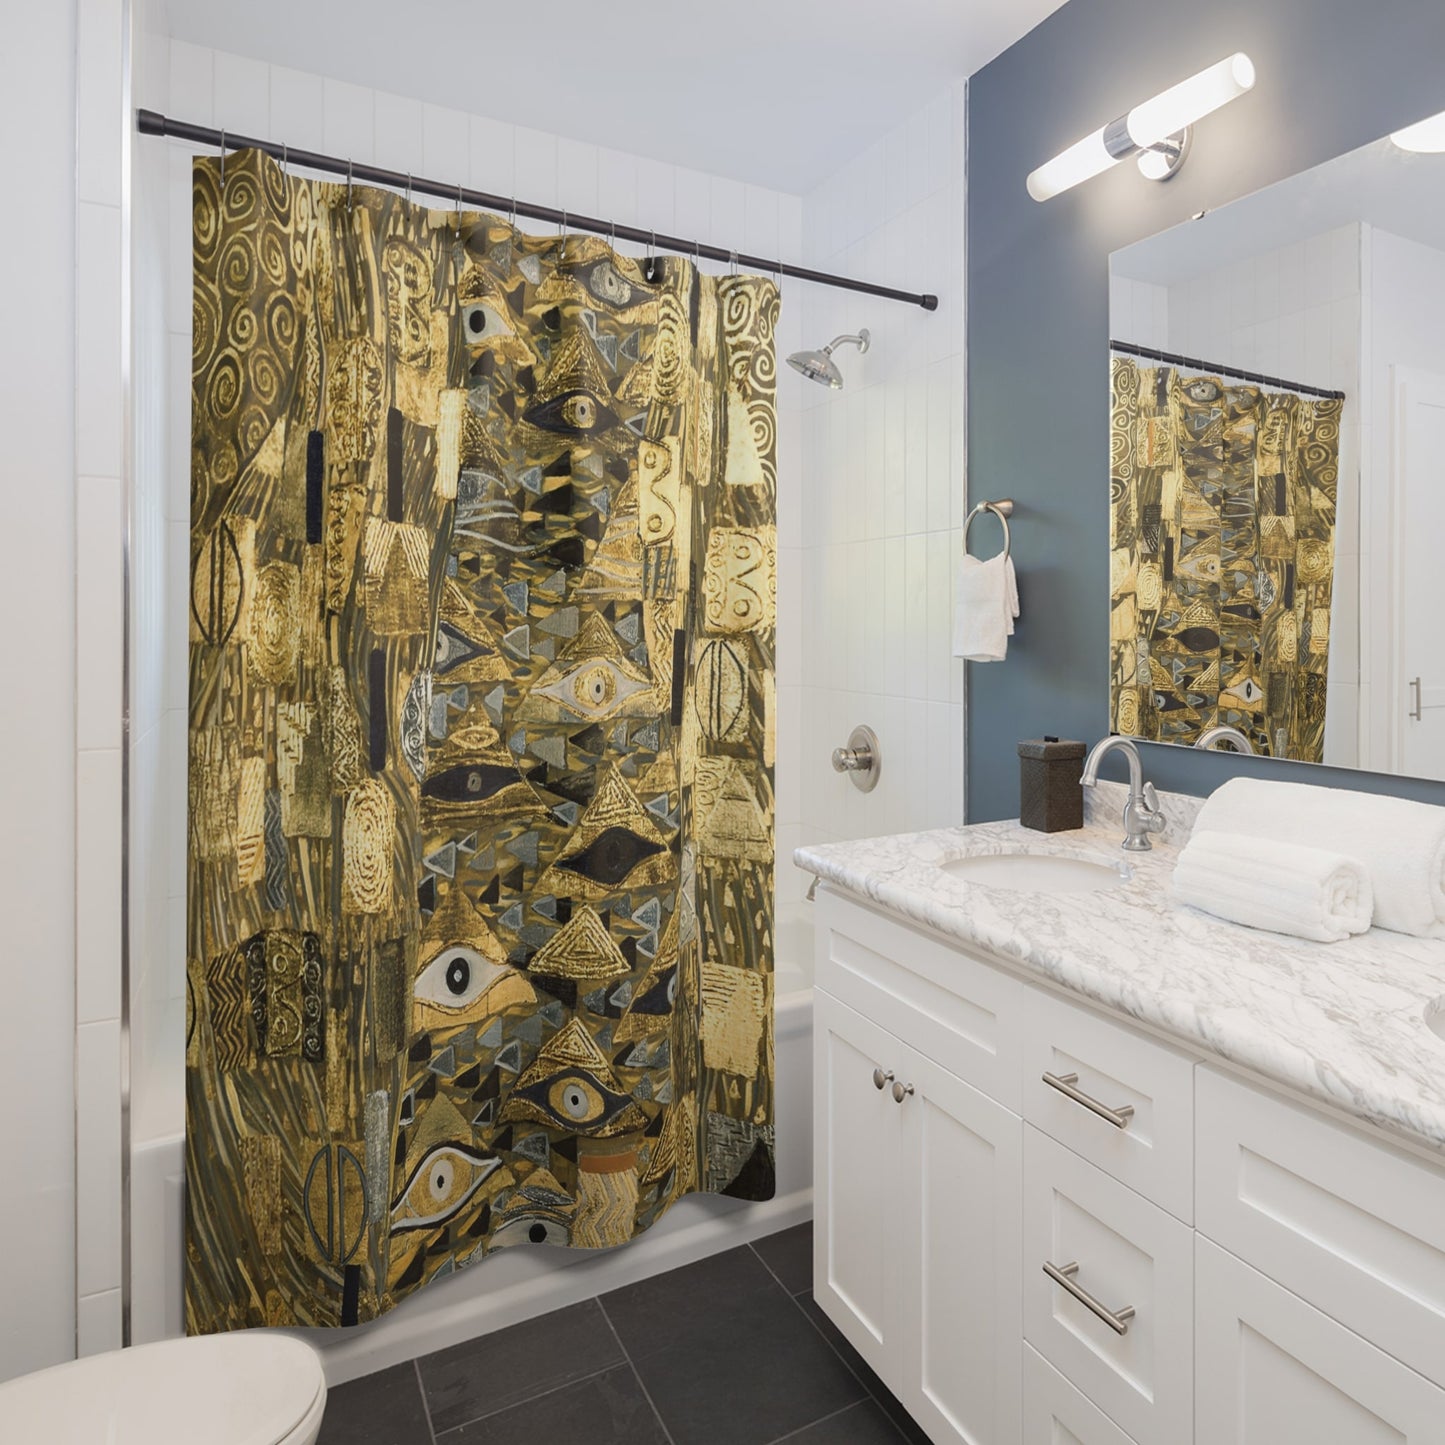 The Lady in Gold Shower Curtain Best Bathroom Decorating Ideas for Art Nouveau Decor